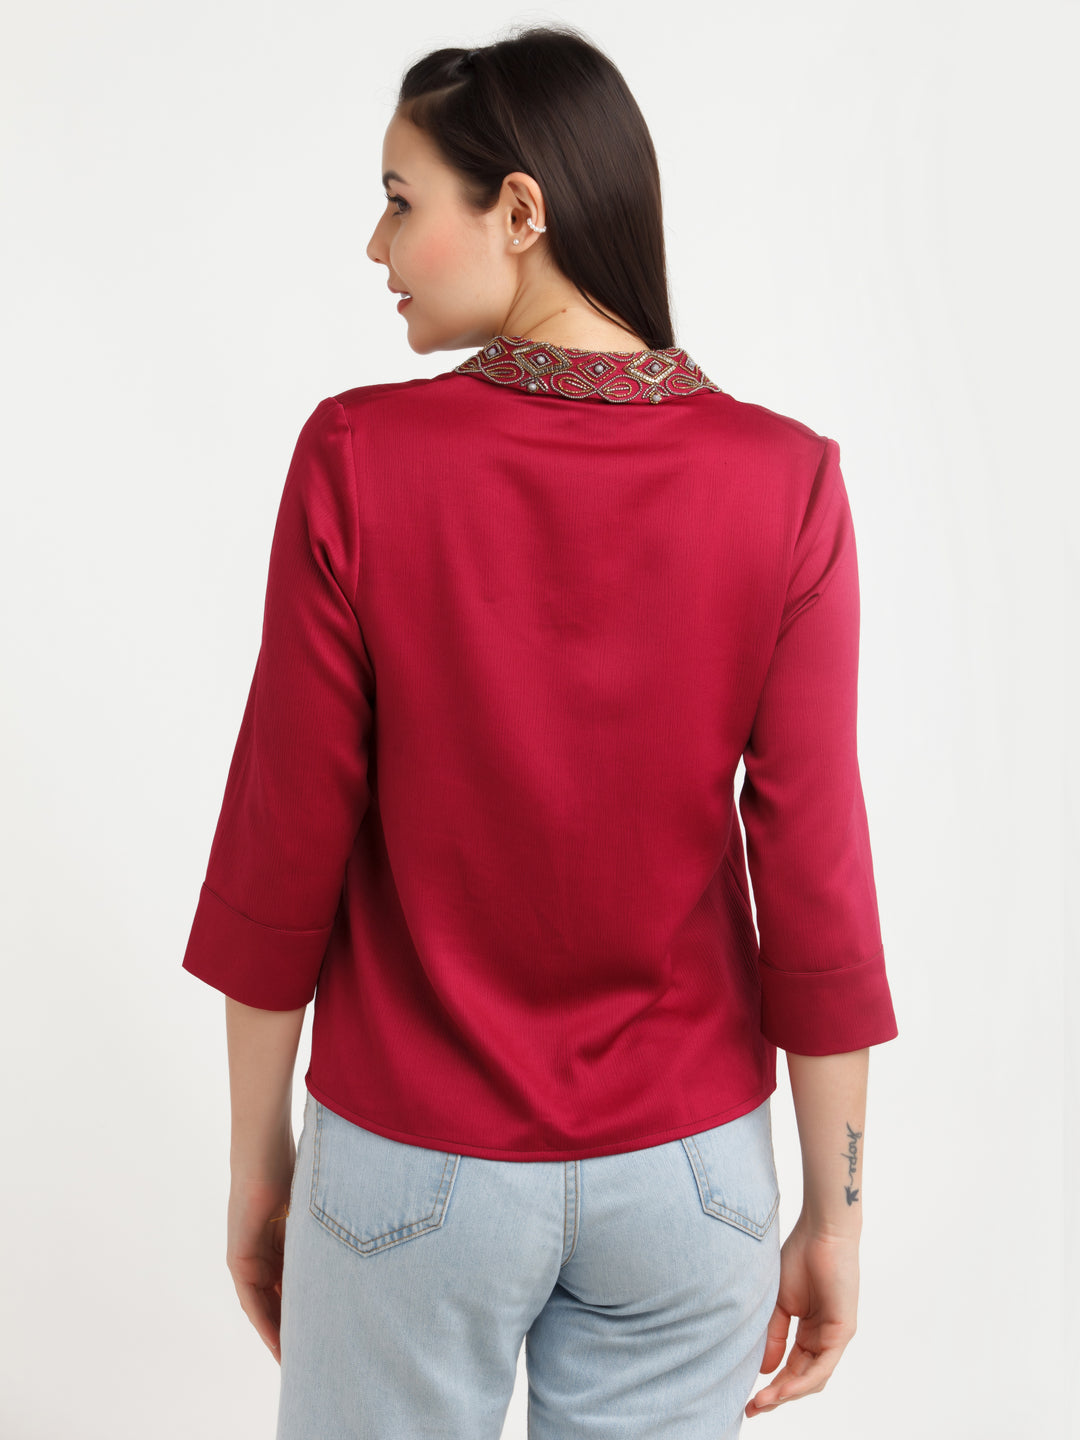 Maroon Embellished Shirt Top For Women